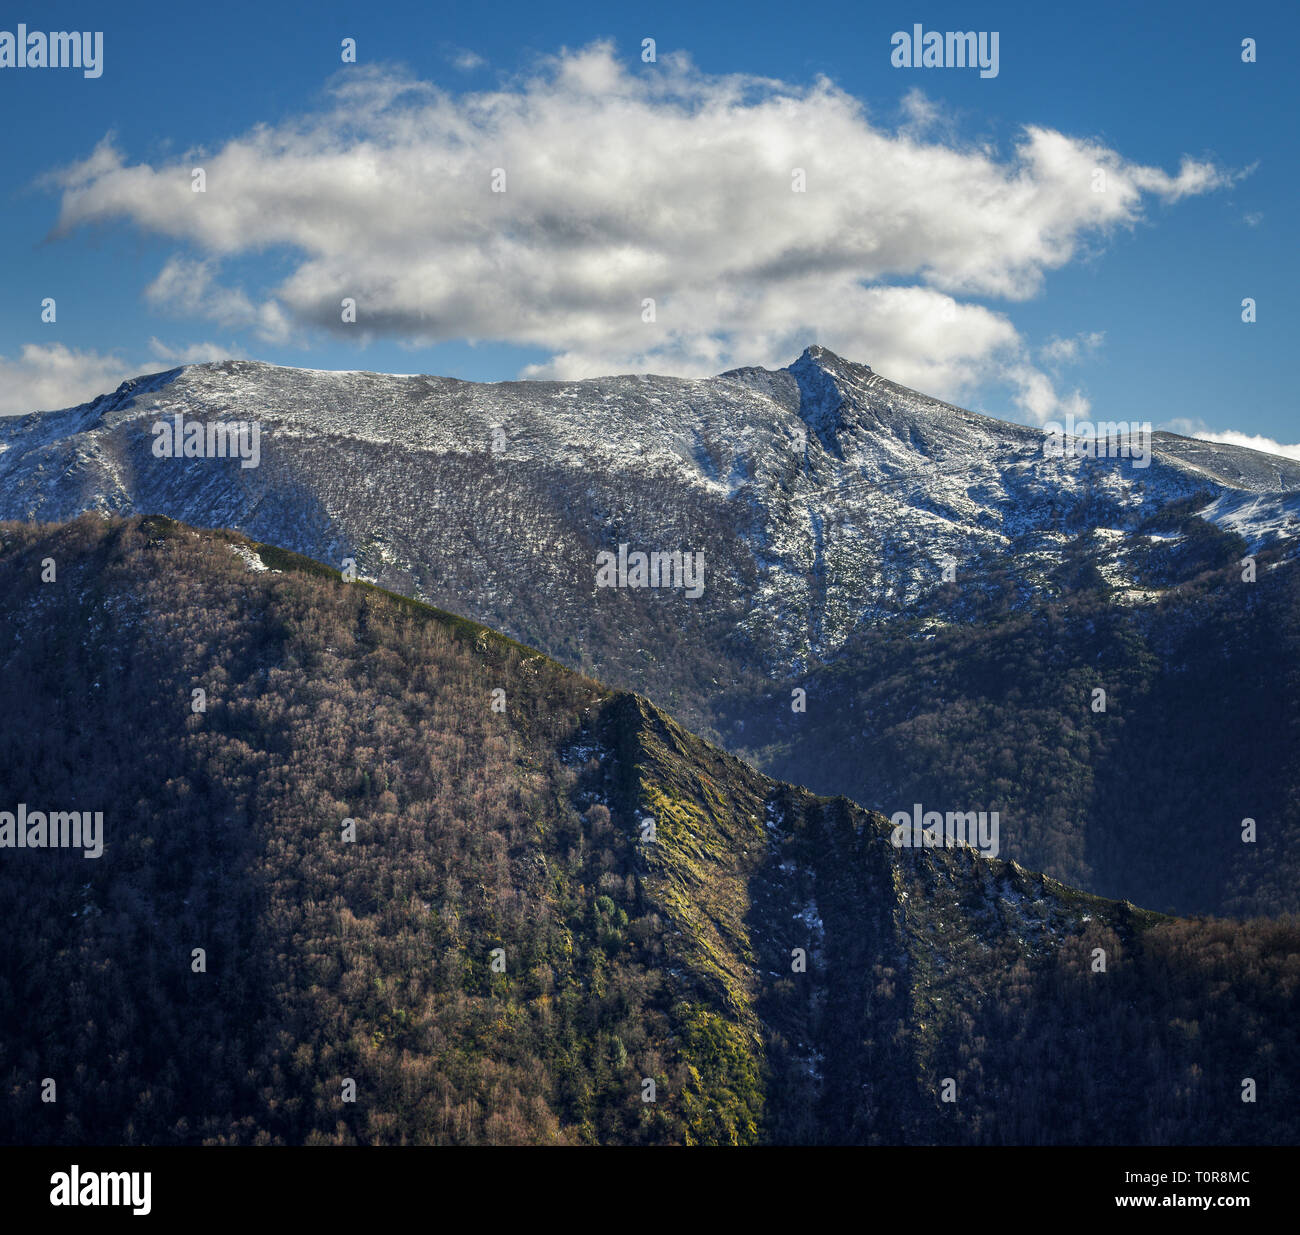 A cloud over the peak of a snowy mountain, with another mountain in the foreground covered with forest, in Ancares, Galicia Stock Photo